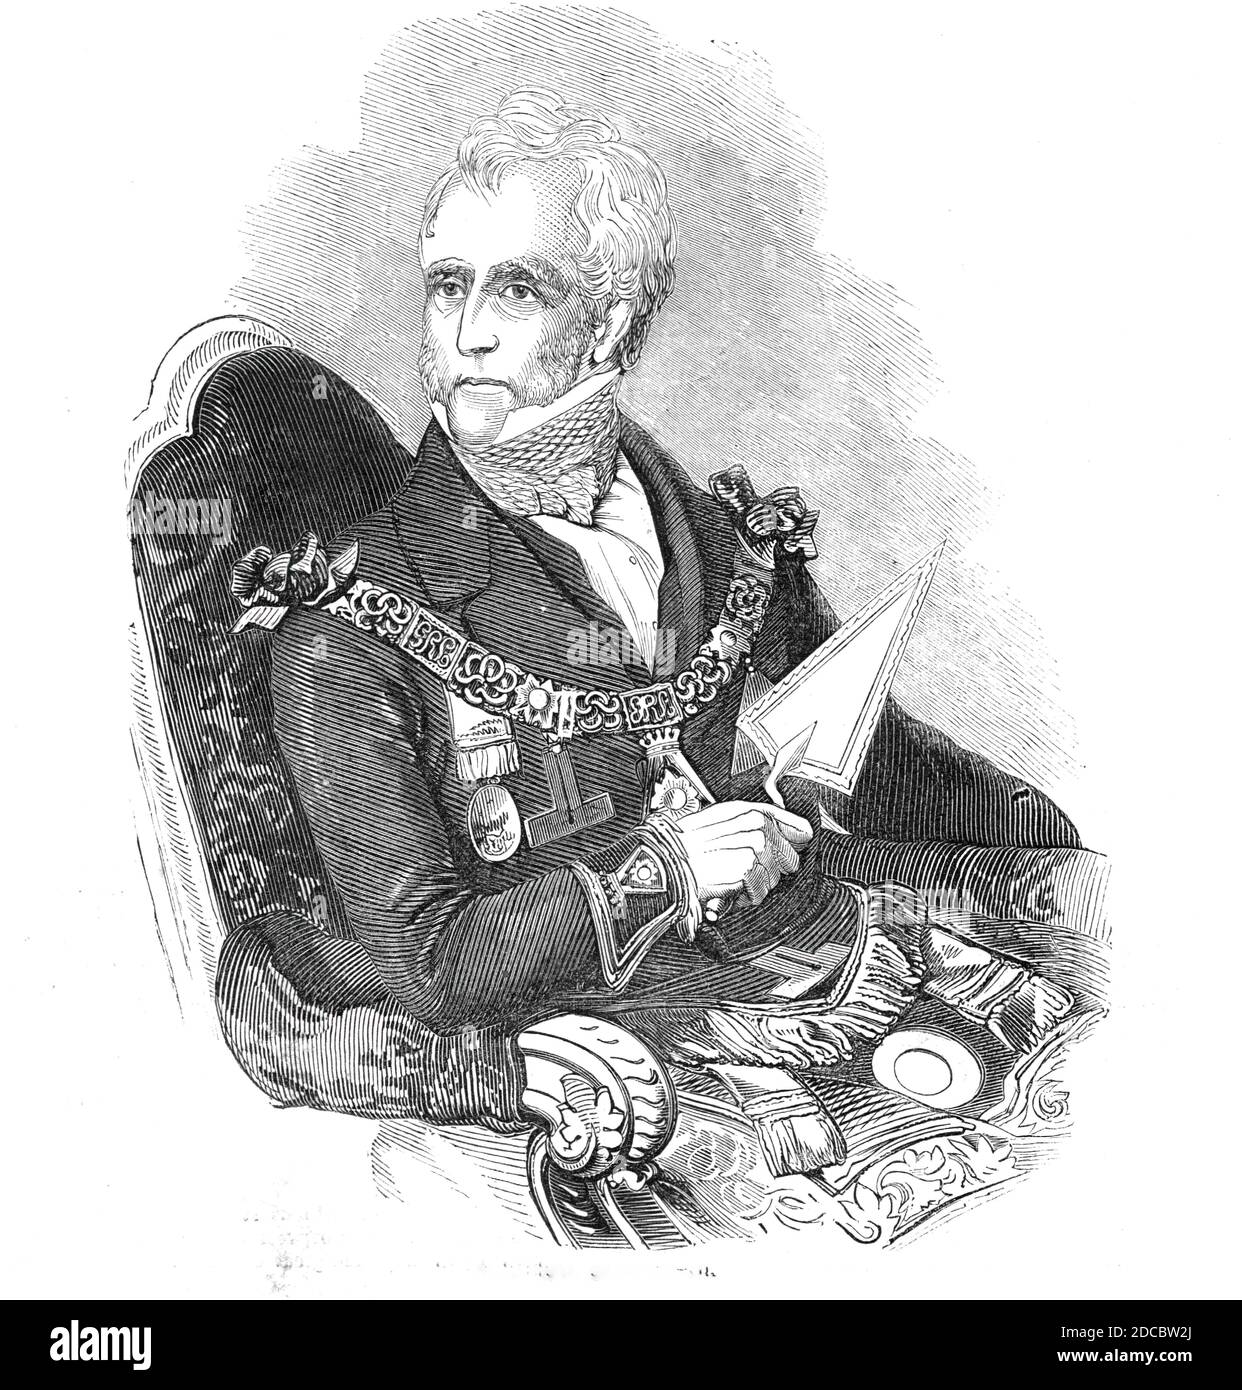 The Earl of Zetland, 1844. Portrait of Thomas Dundas, 2nd Earl of Zetland, Grand Master of the Freemasons of England, holding the silver trowel with which he laid the foundation stone of the Caledonian Girls' School in 1844. From &quot;Illustrated London News&quot;, 1844, Vol I. Stock Photo